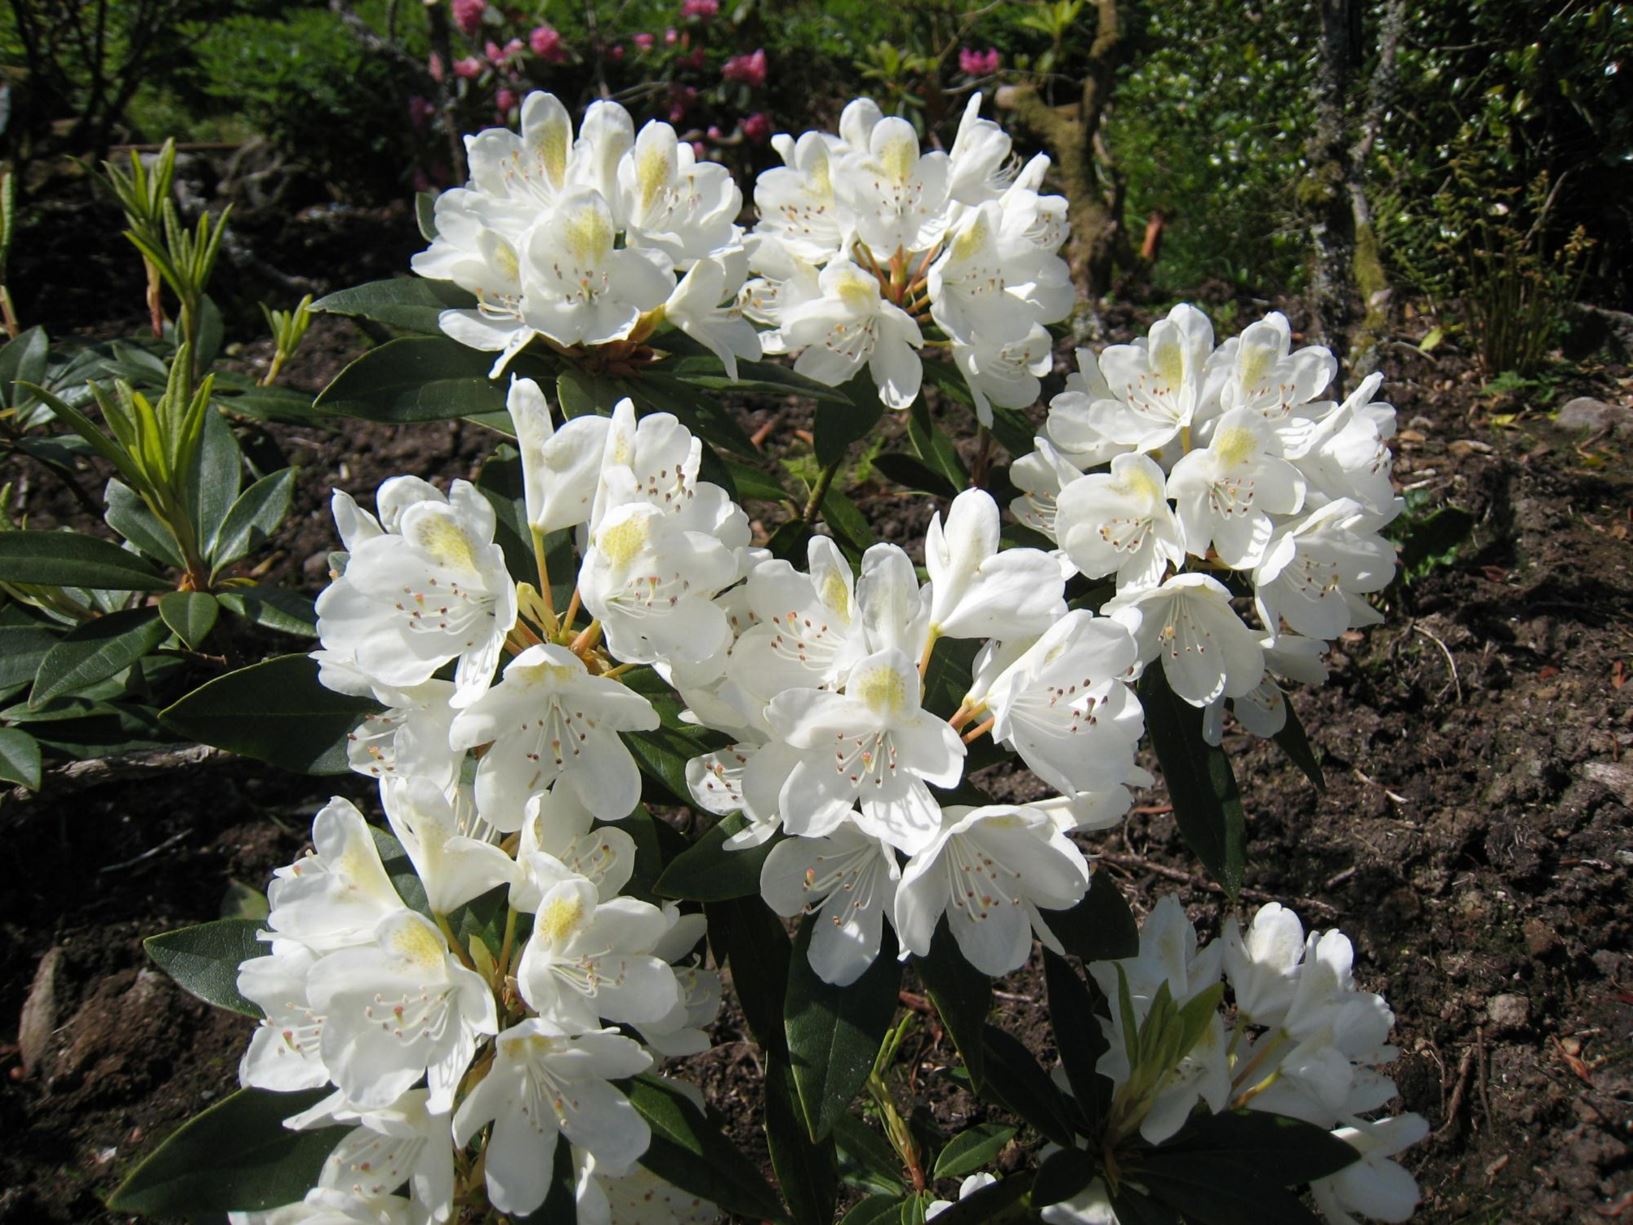 Rhododendron 'Chionoides'